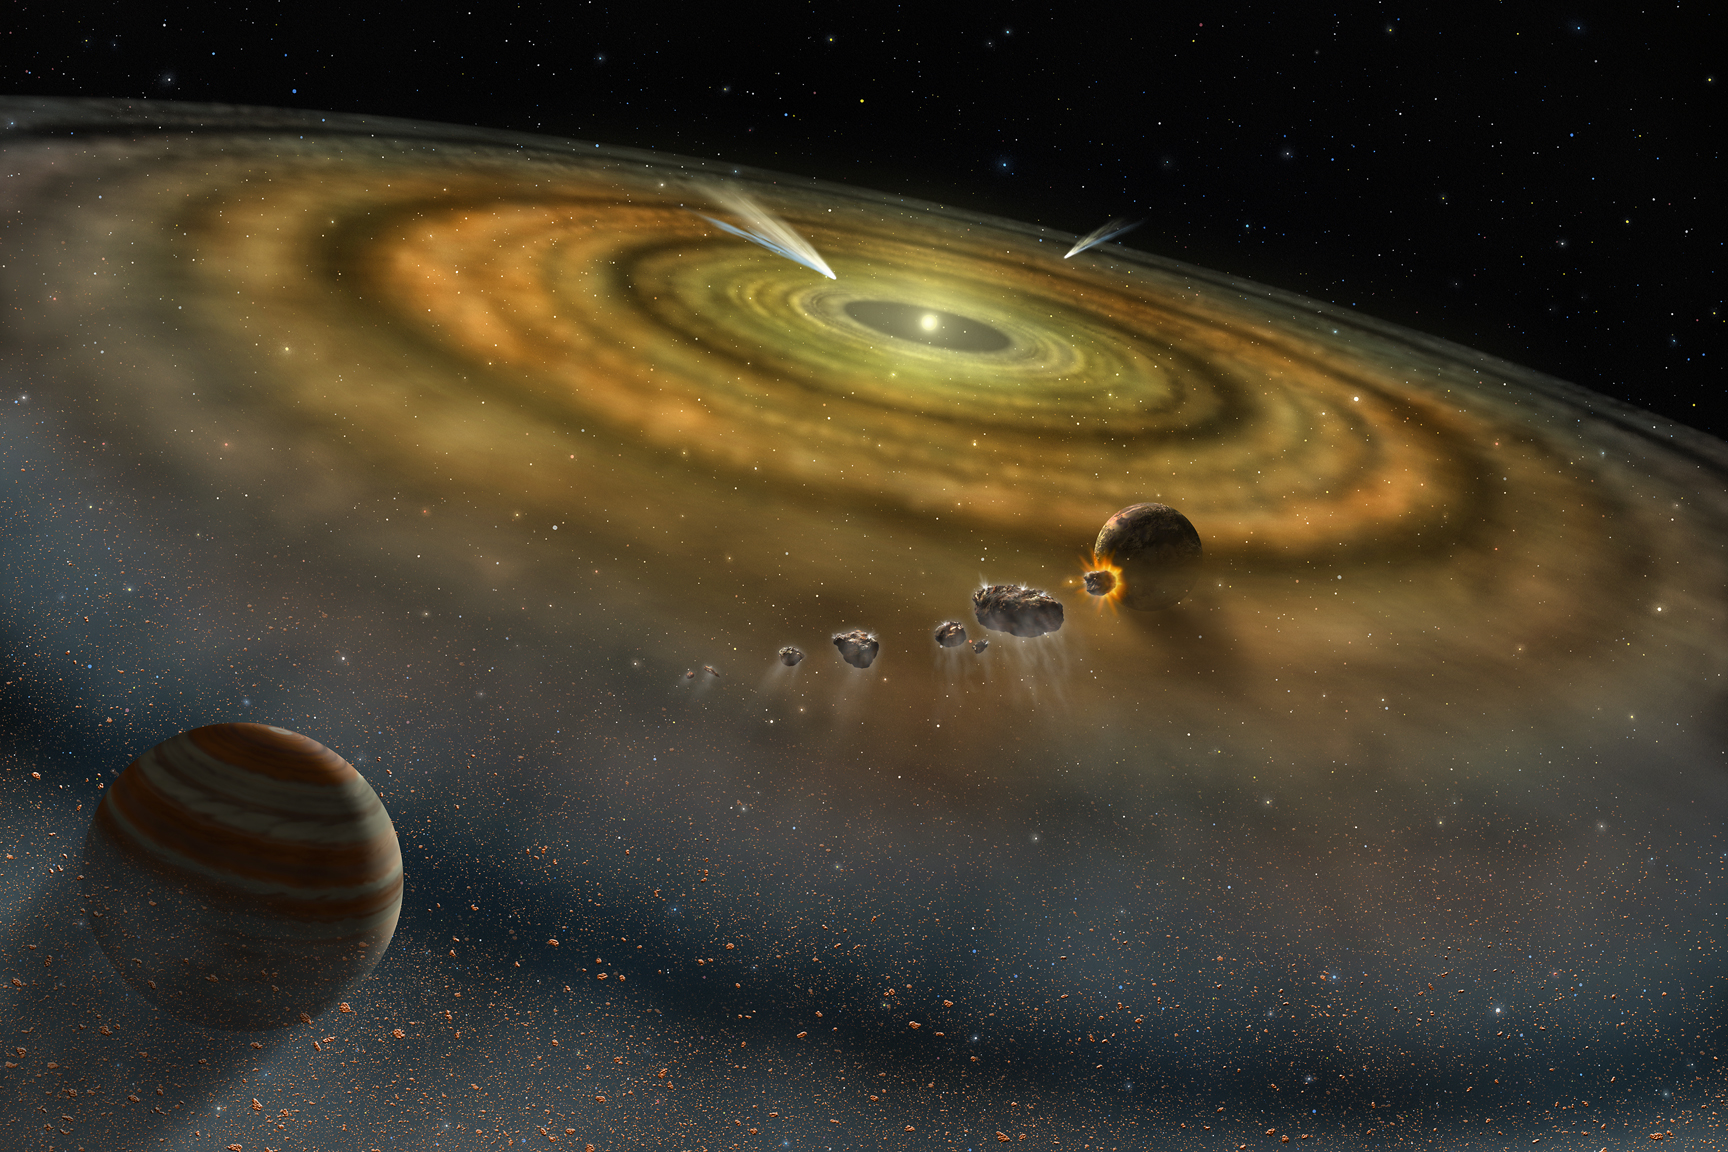 planetary system depiction